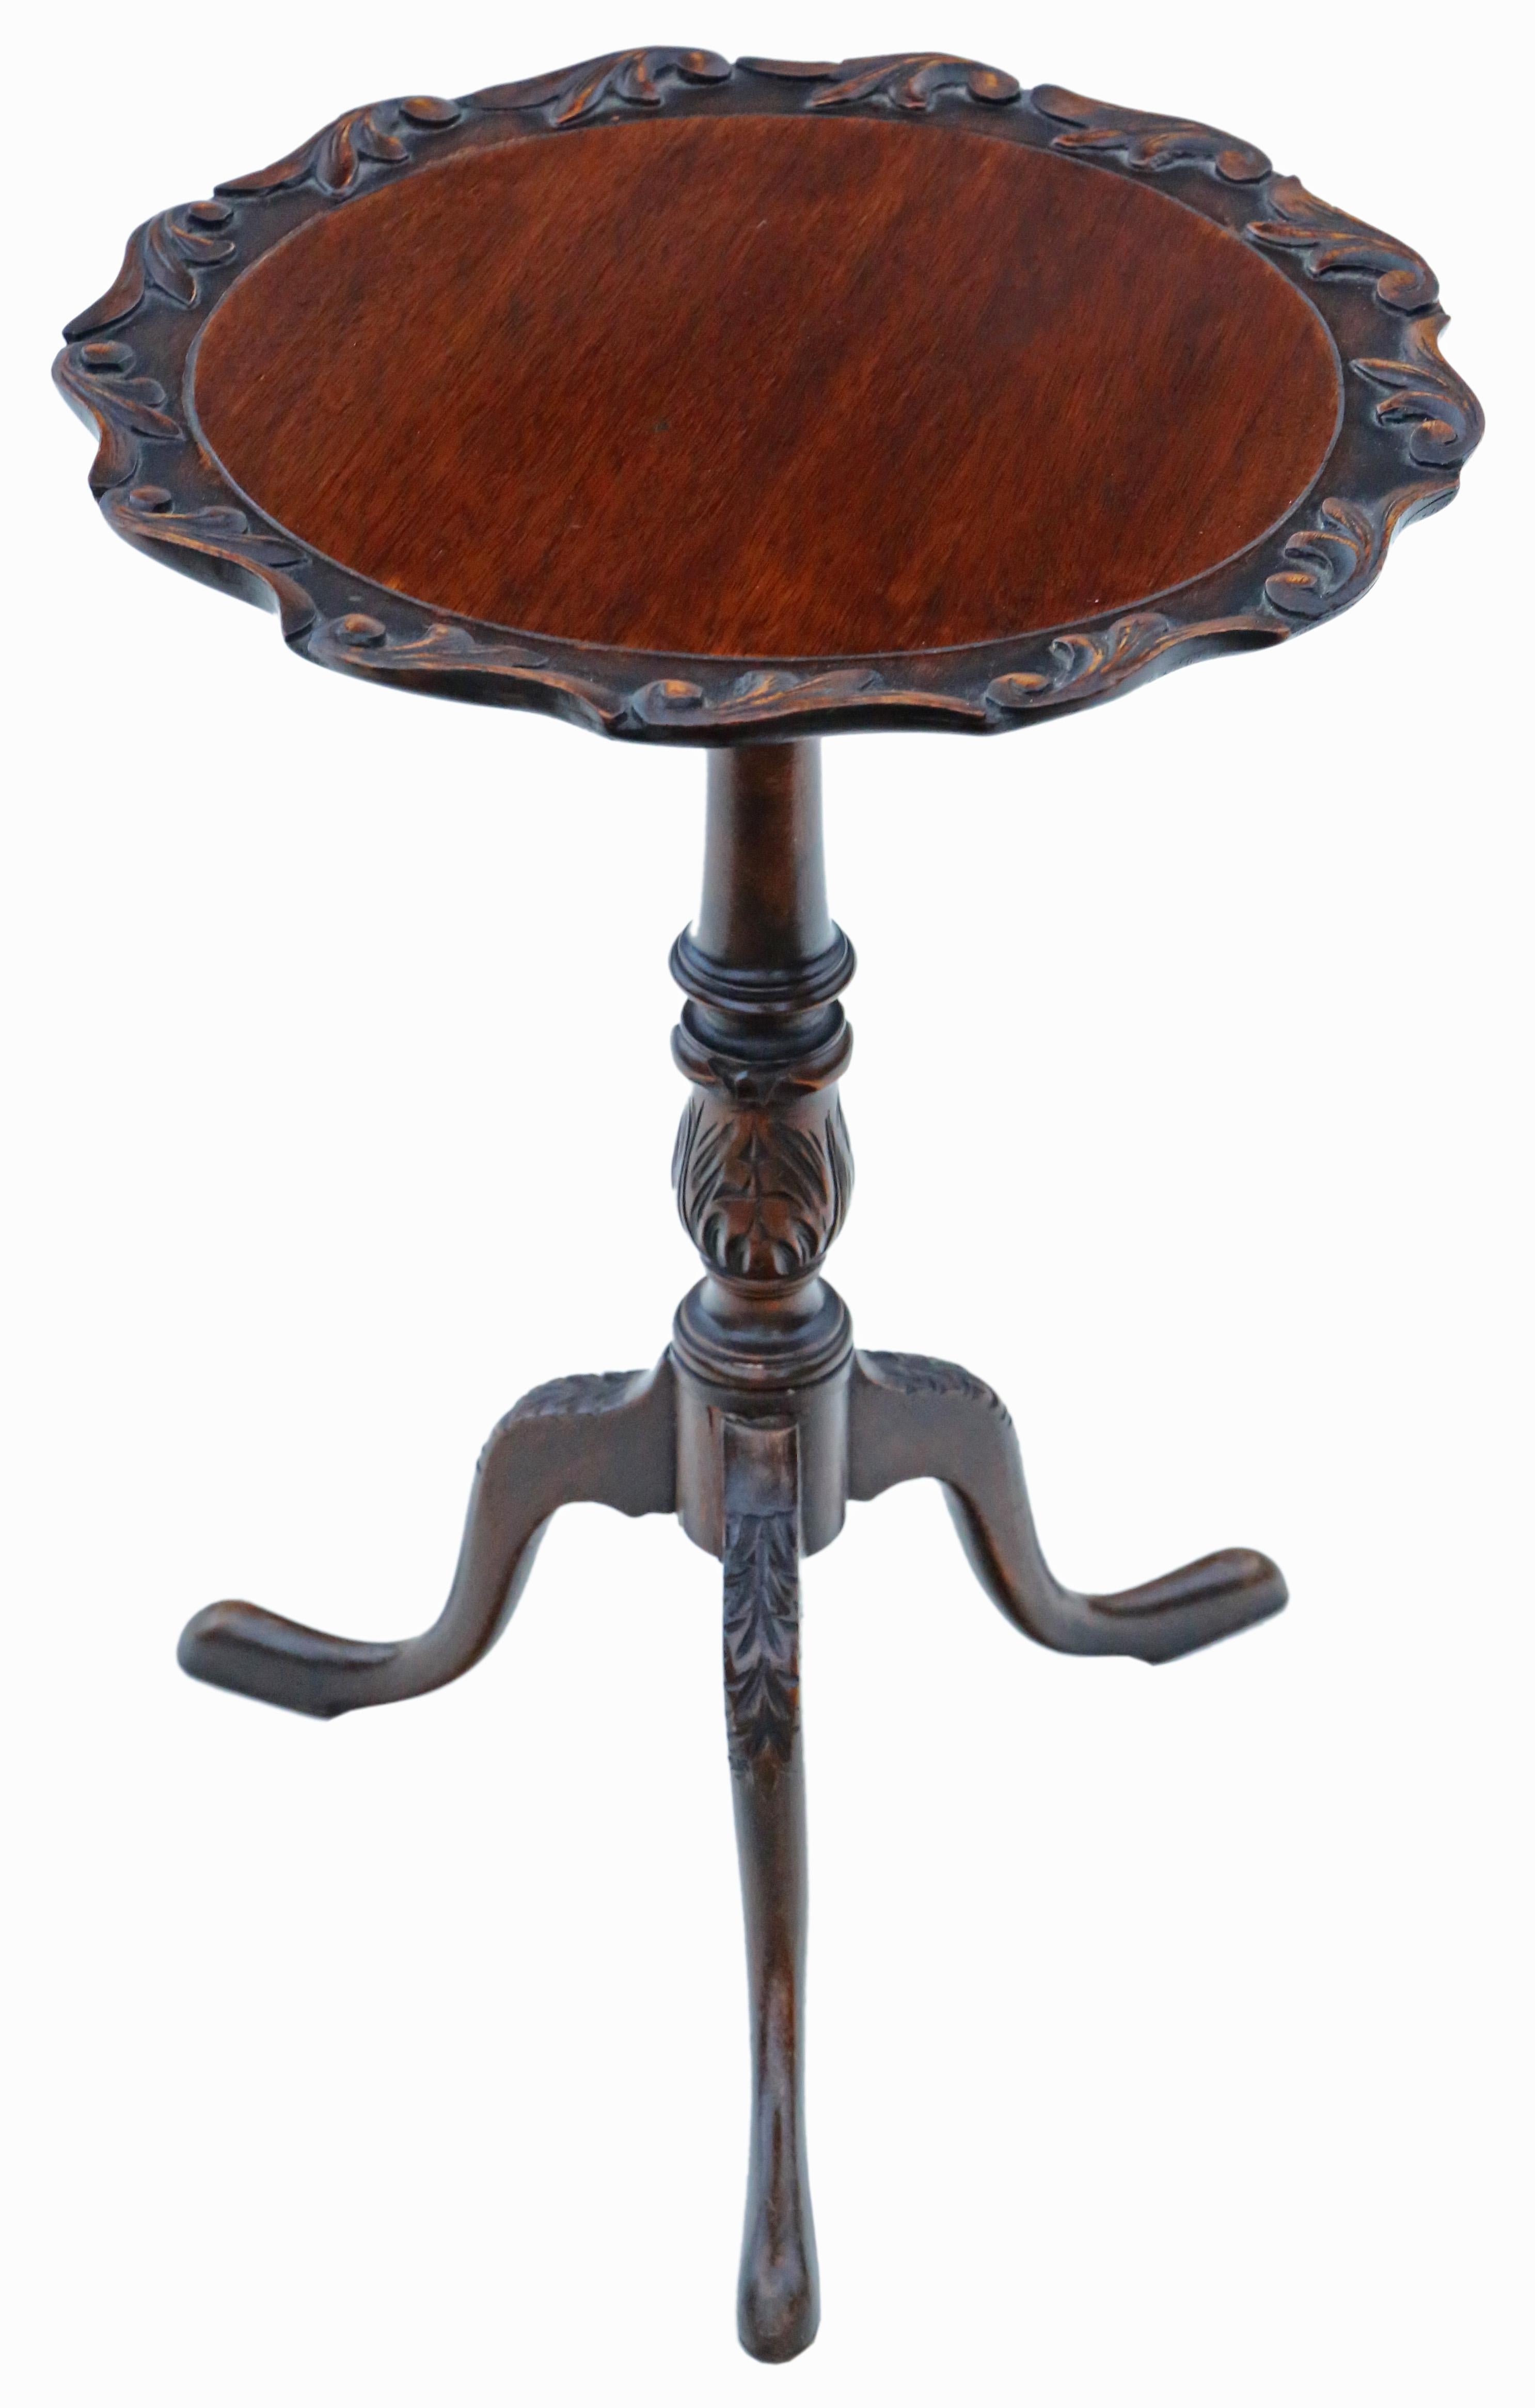 Antique fine quality Georgian revival wine or side table C1910 mahogany.

Solid with no loose joints. A charming table with a lovely carving.

No woodworm.

Would look great in the right location!

Overall maximum dimensions: top 34cm diameter,